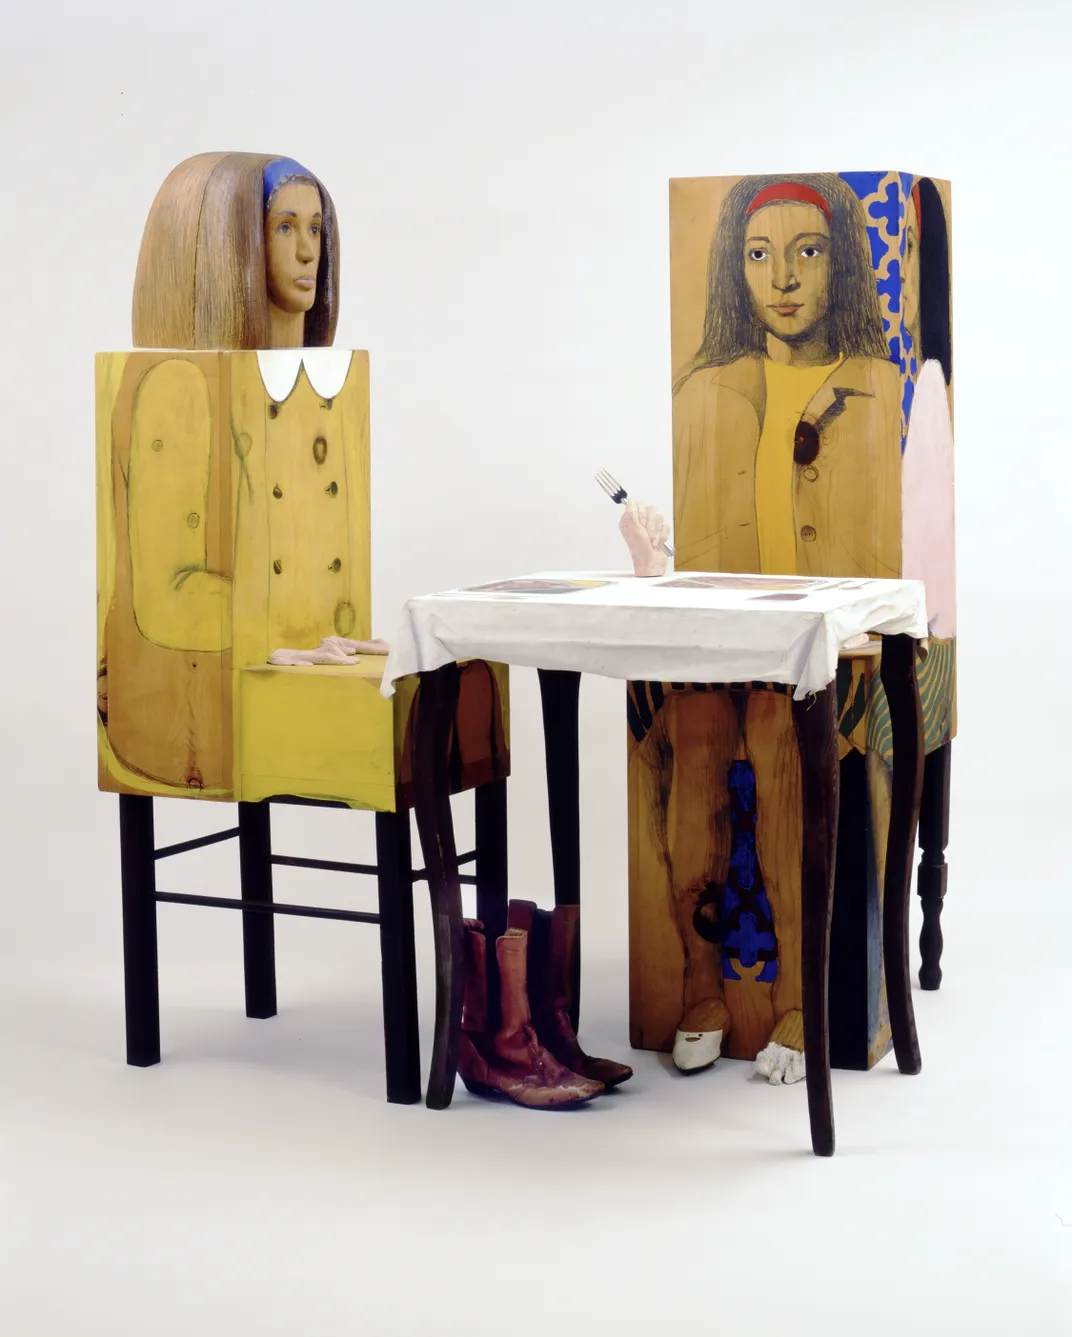 Marisol's Dinner Date, a wooden sculpture of two women at a table